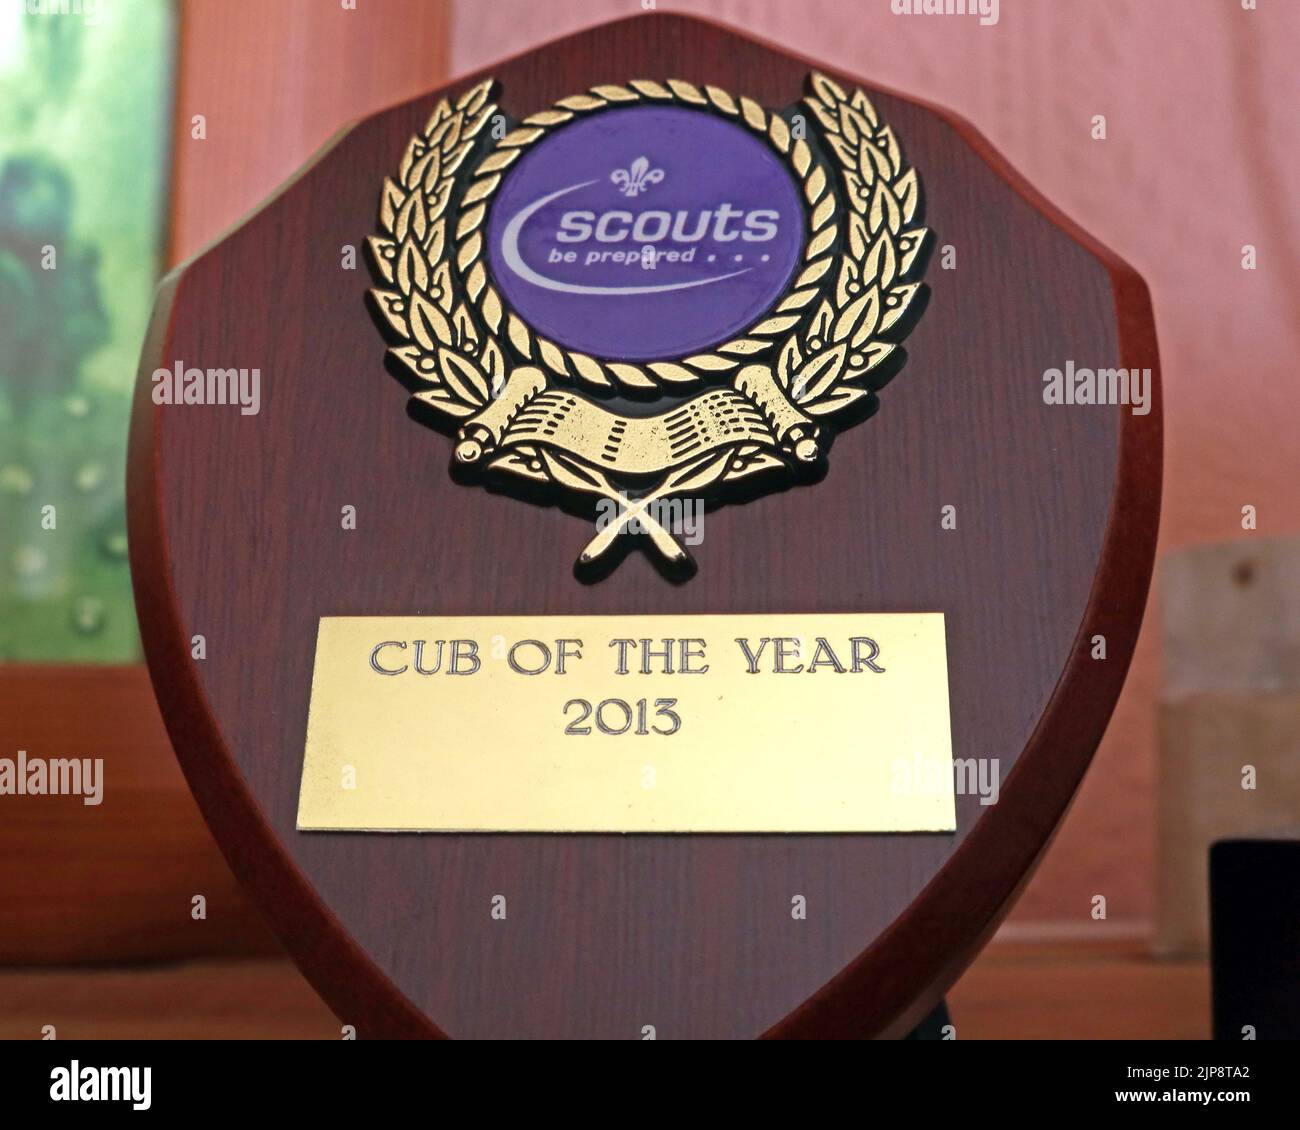 Scouts, cub of the year trophy, UK Stock Photo